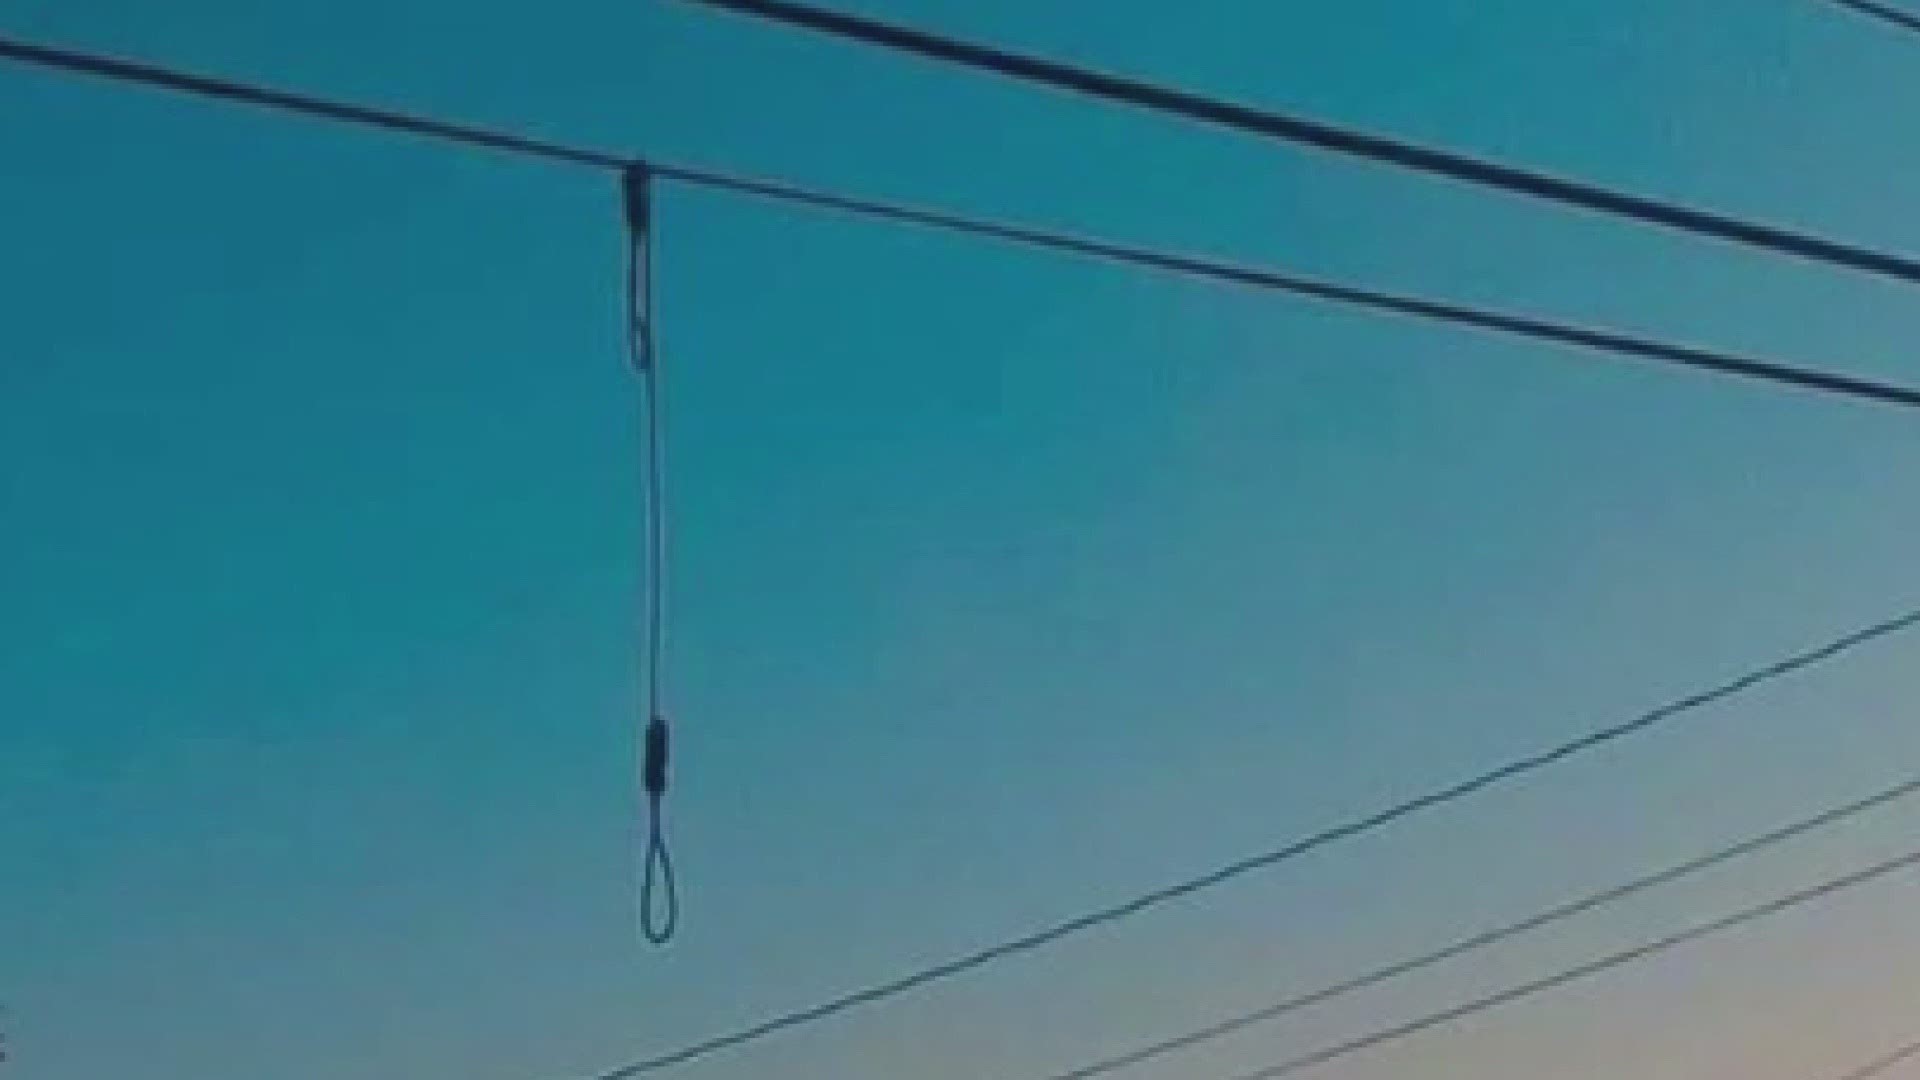 The Deer Isle community struggles to understand why someone would put a noose up on wires